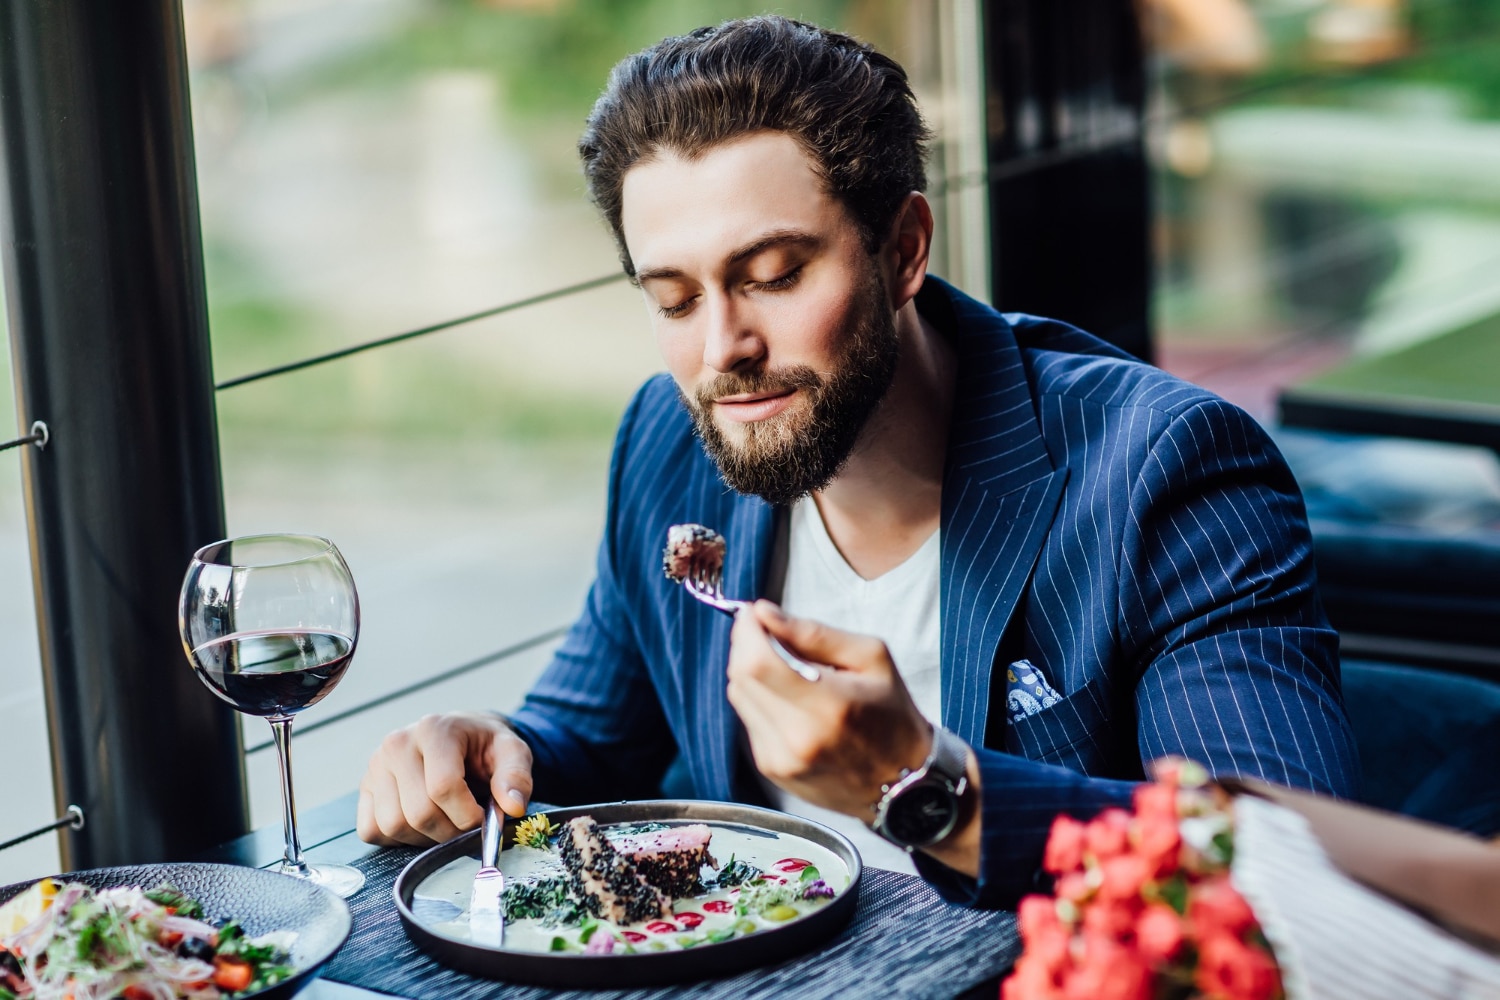 Man eating a salad in a restaurant